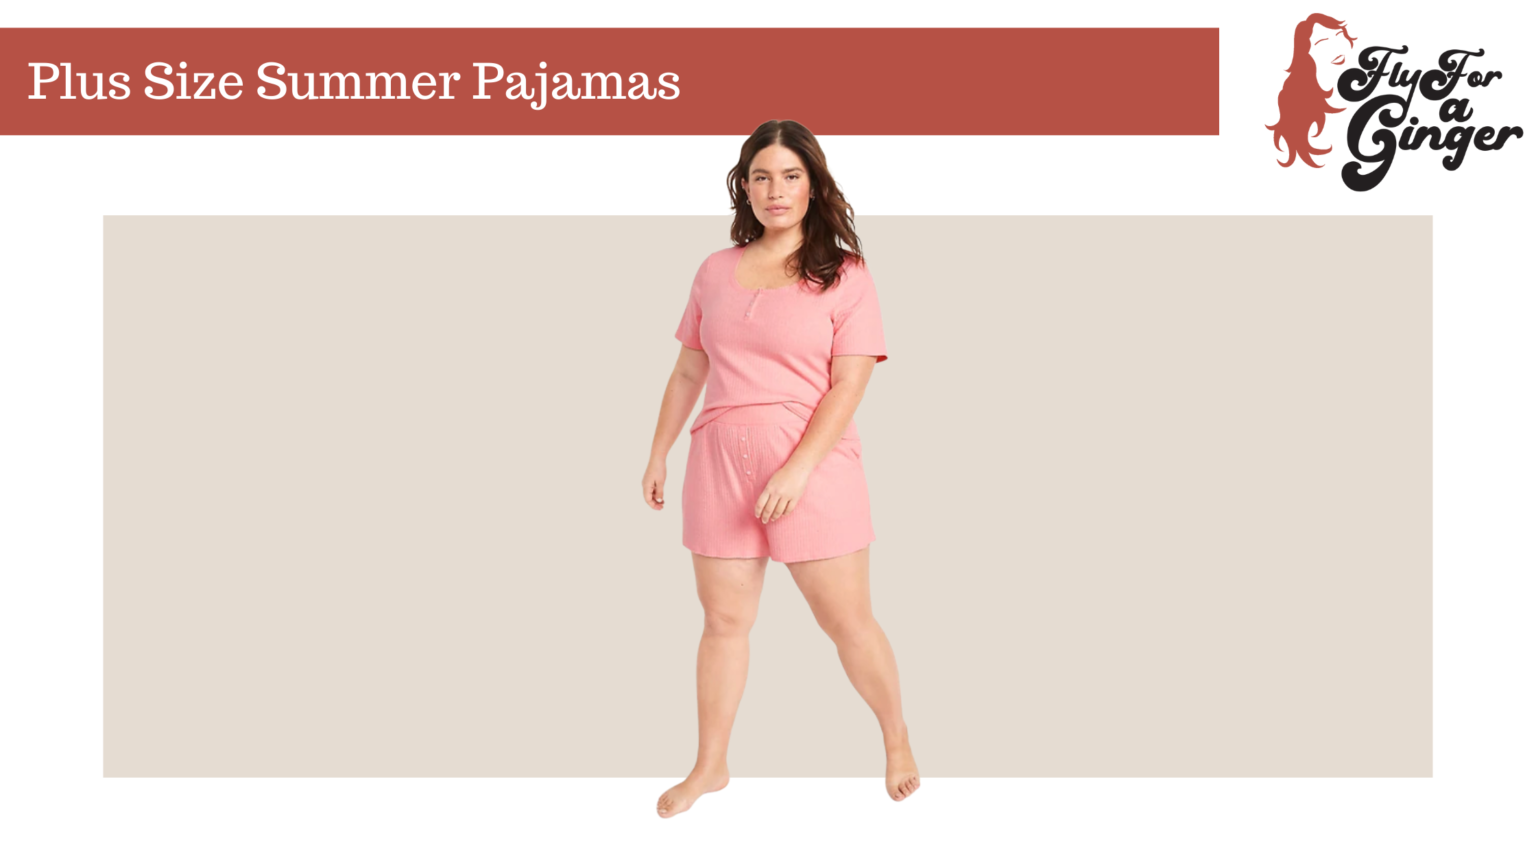 Plus Size Pajamas for Summer